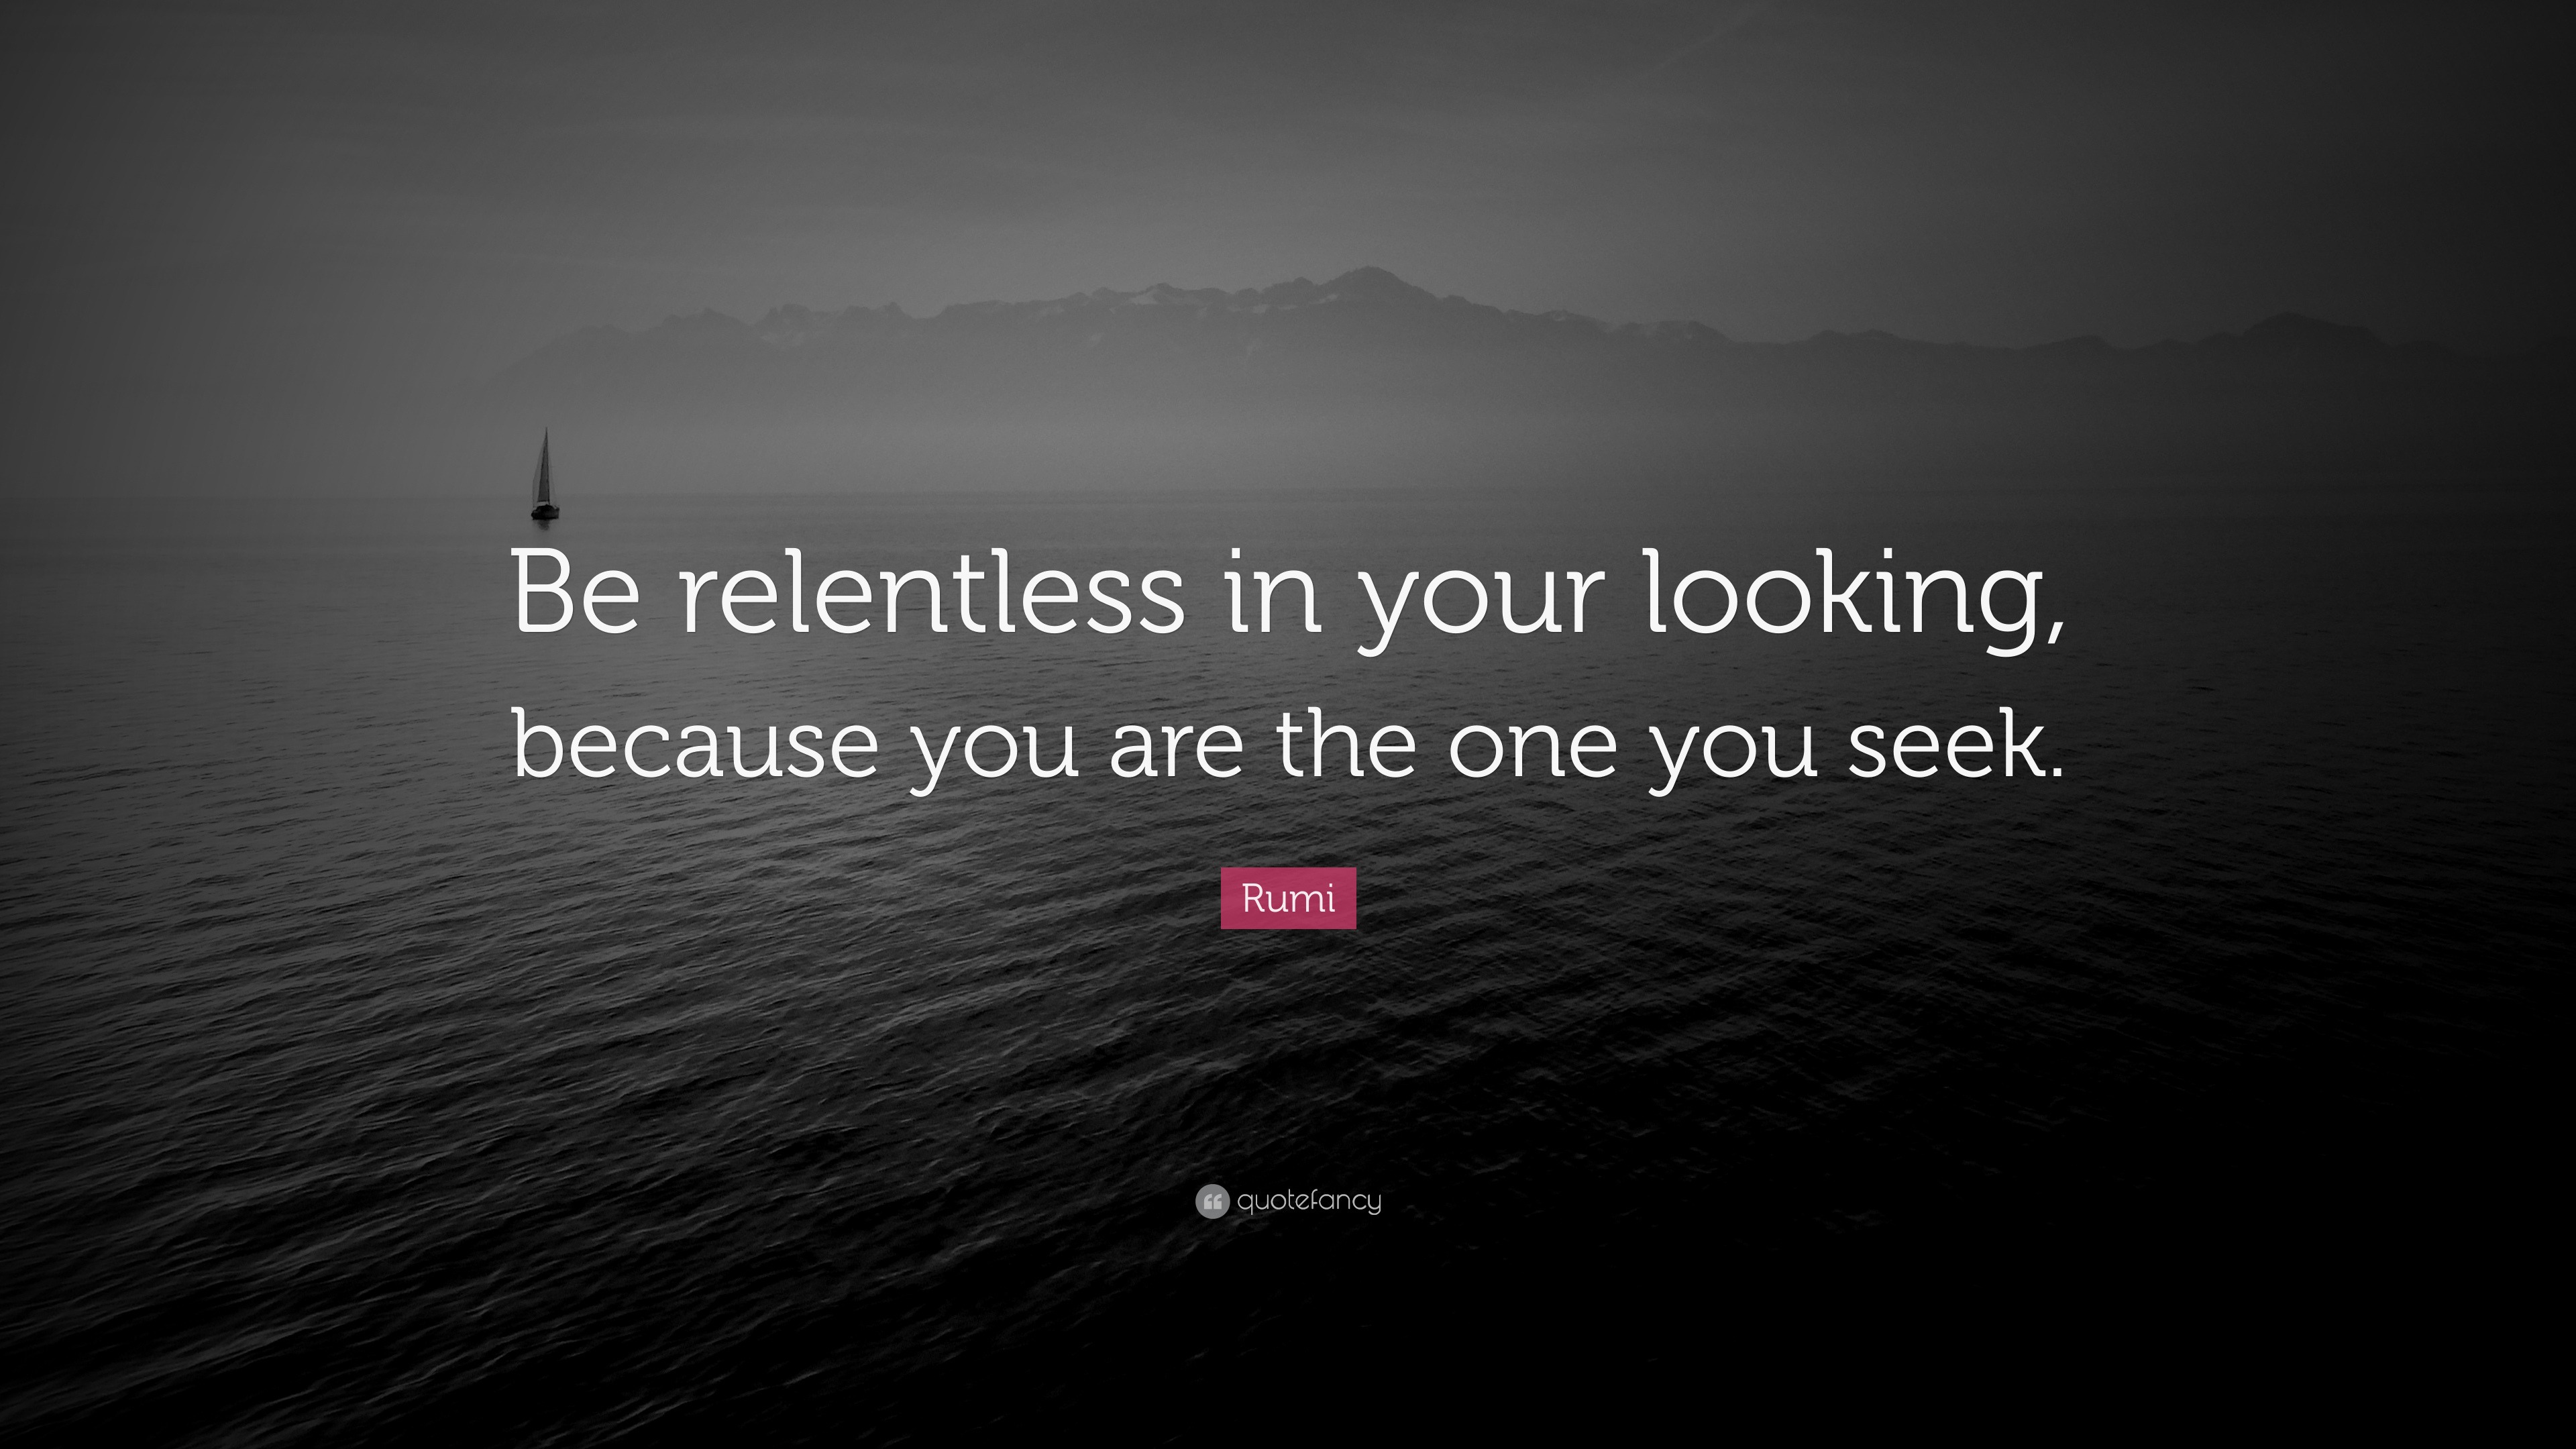 Rumi Quote: “Be relentless in your looking, because you are the one you ...